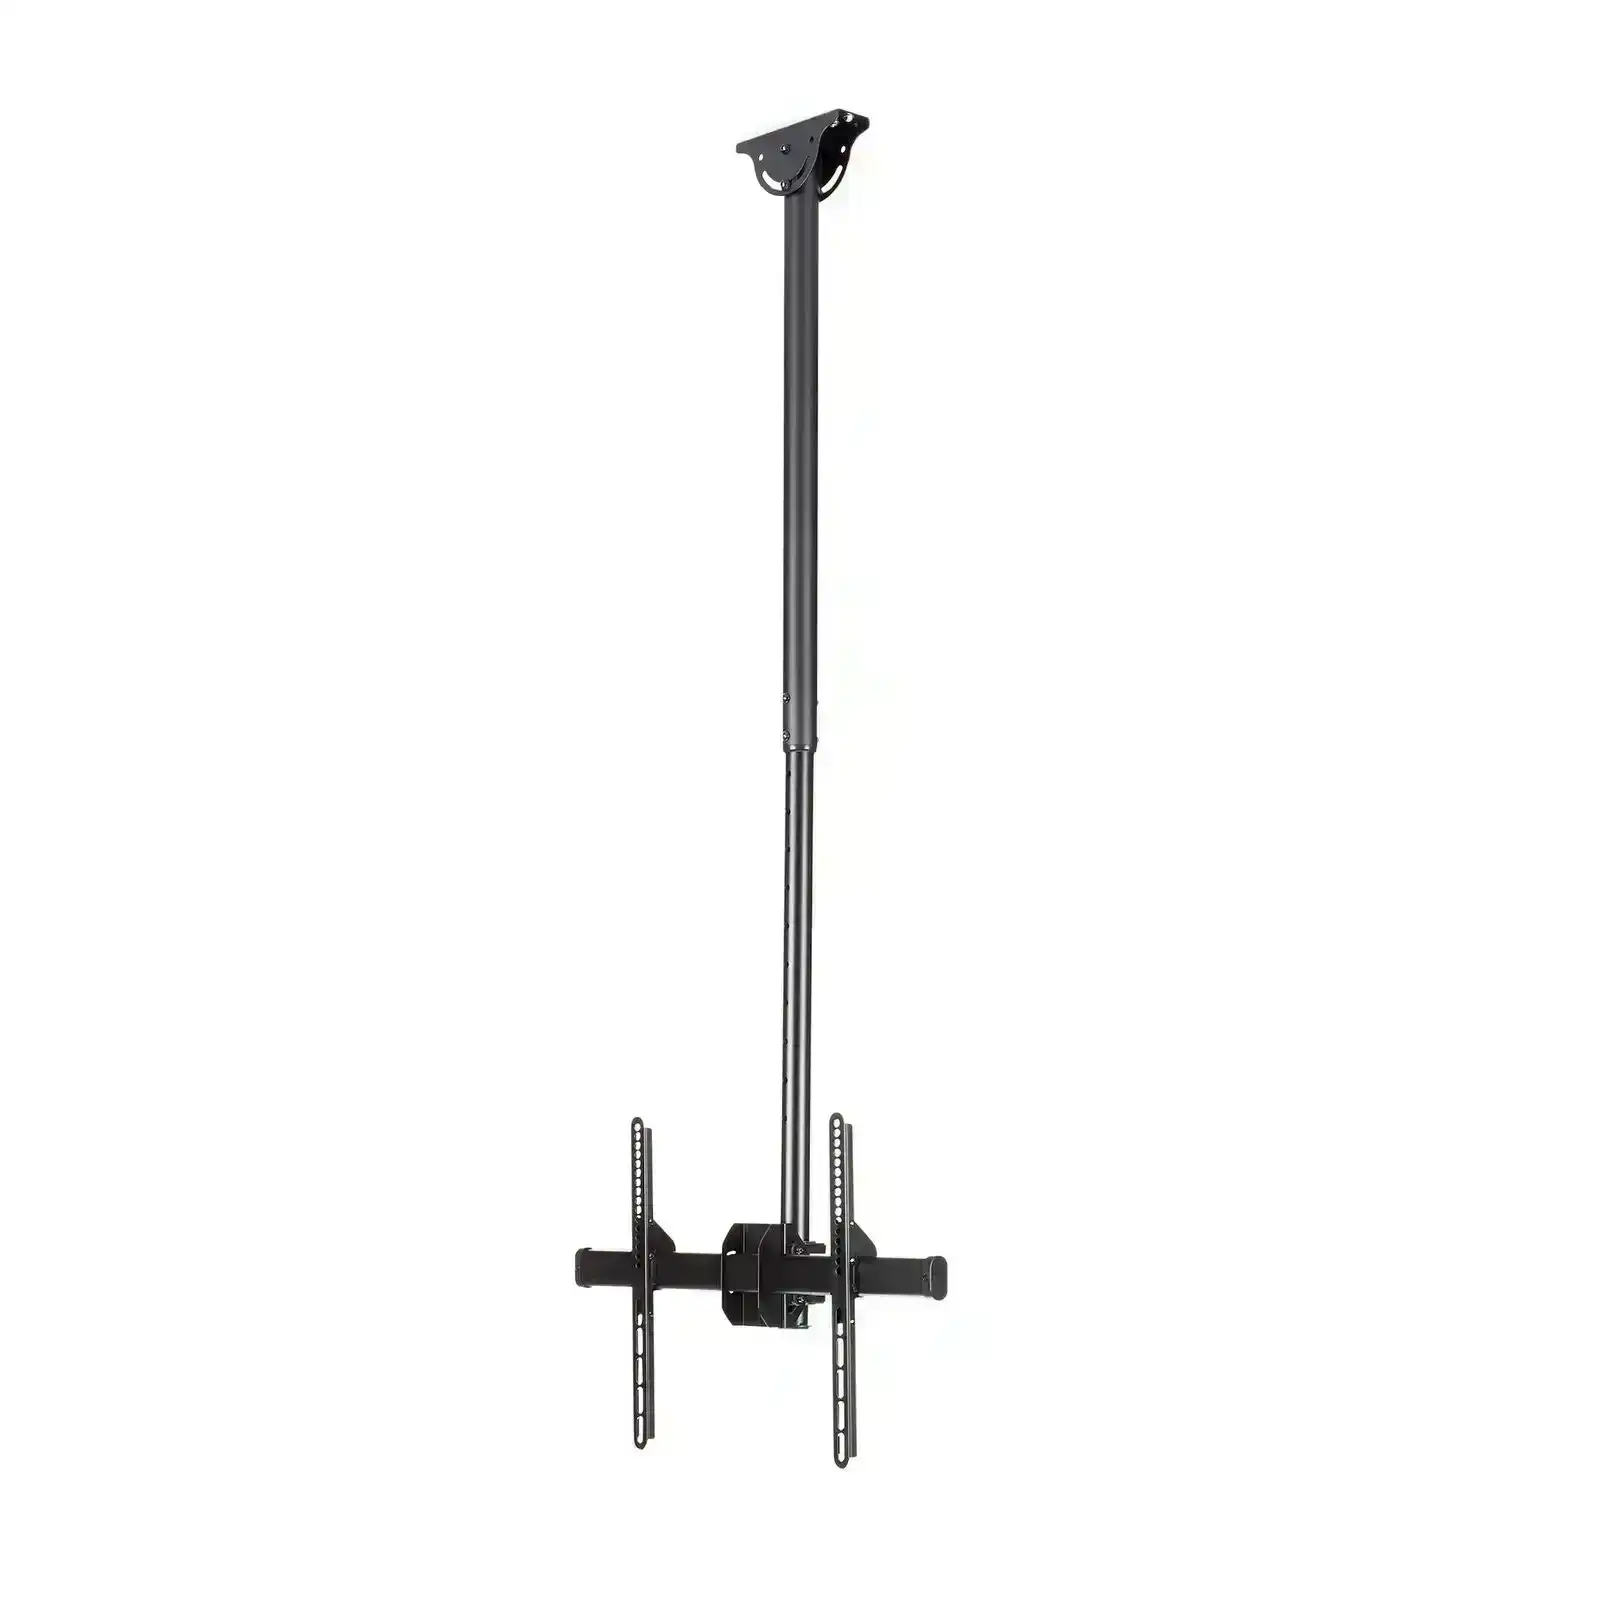 Star Tech Full Motion 42-61IN Pole Ceiling TV Mount for 32-75in 50kg Display